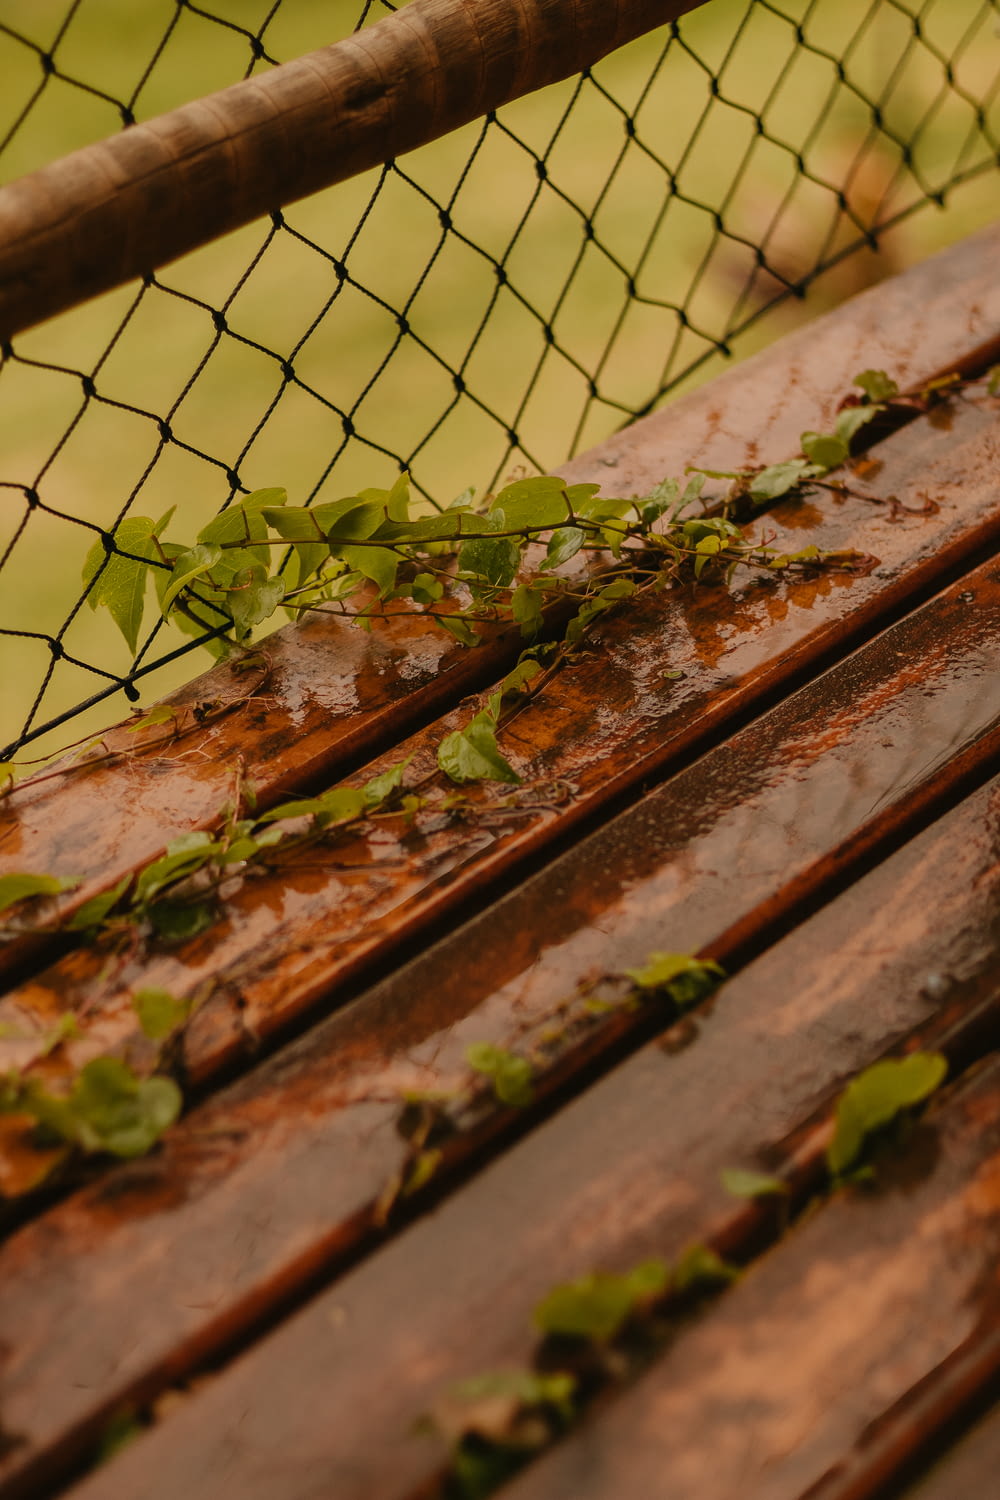 a close up of a wooden bench with vines growing on it